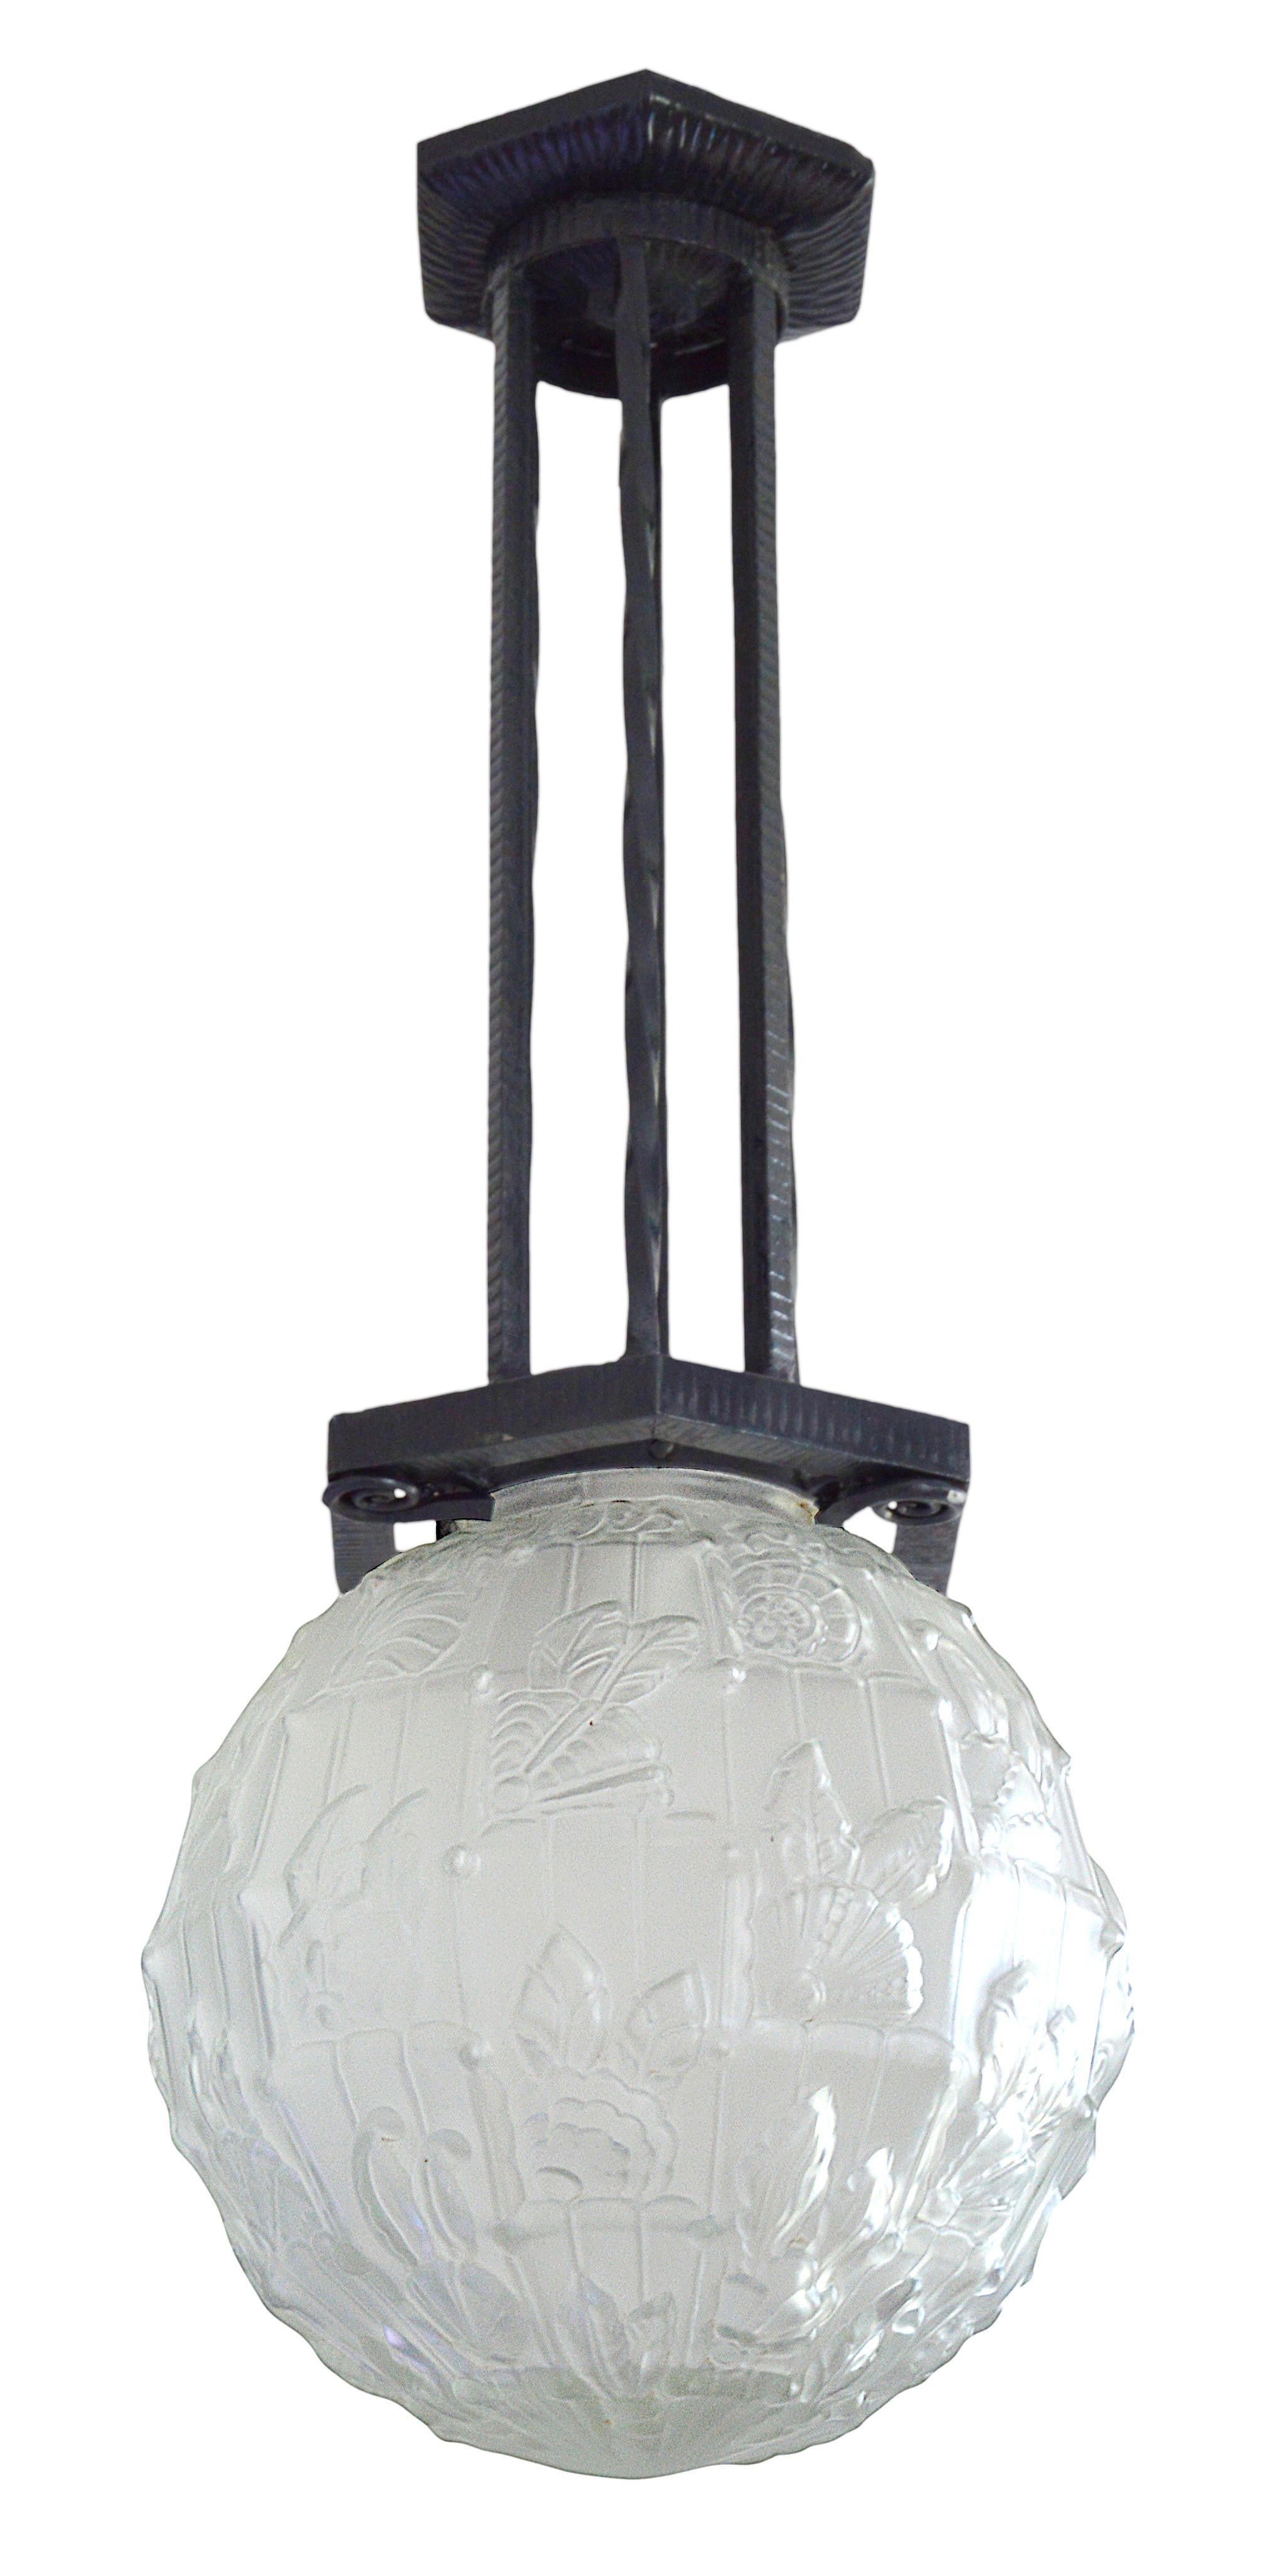 French Art Deco ceiling-light by Cherrier & Besnus, 36 rue Amelot, Paris, France, ca.1925. Large molded glass shade showing a stylized floral pattern hung on its wrought-iron fixture. Measures: Height: 65cm (25.6